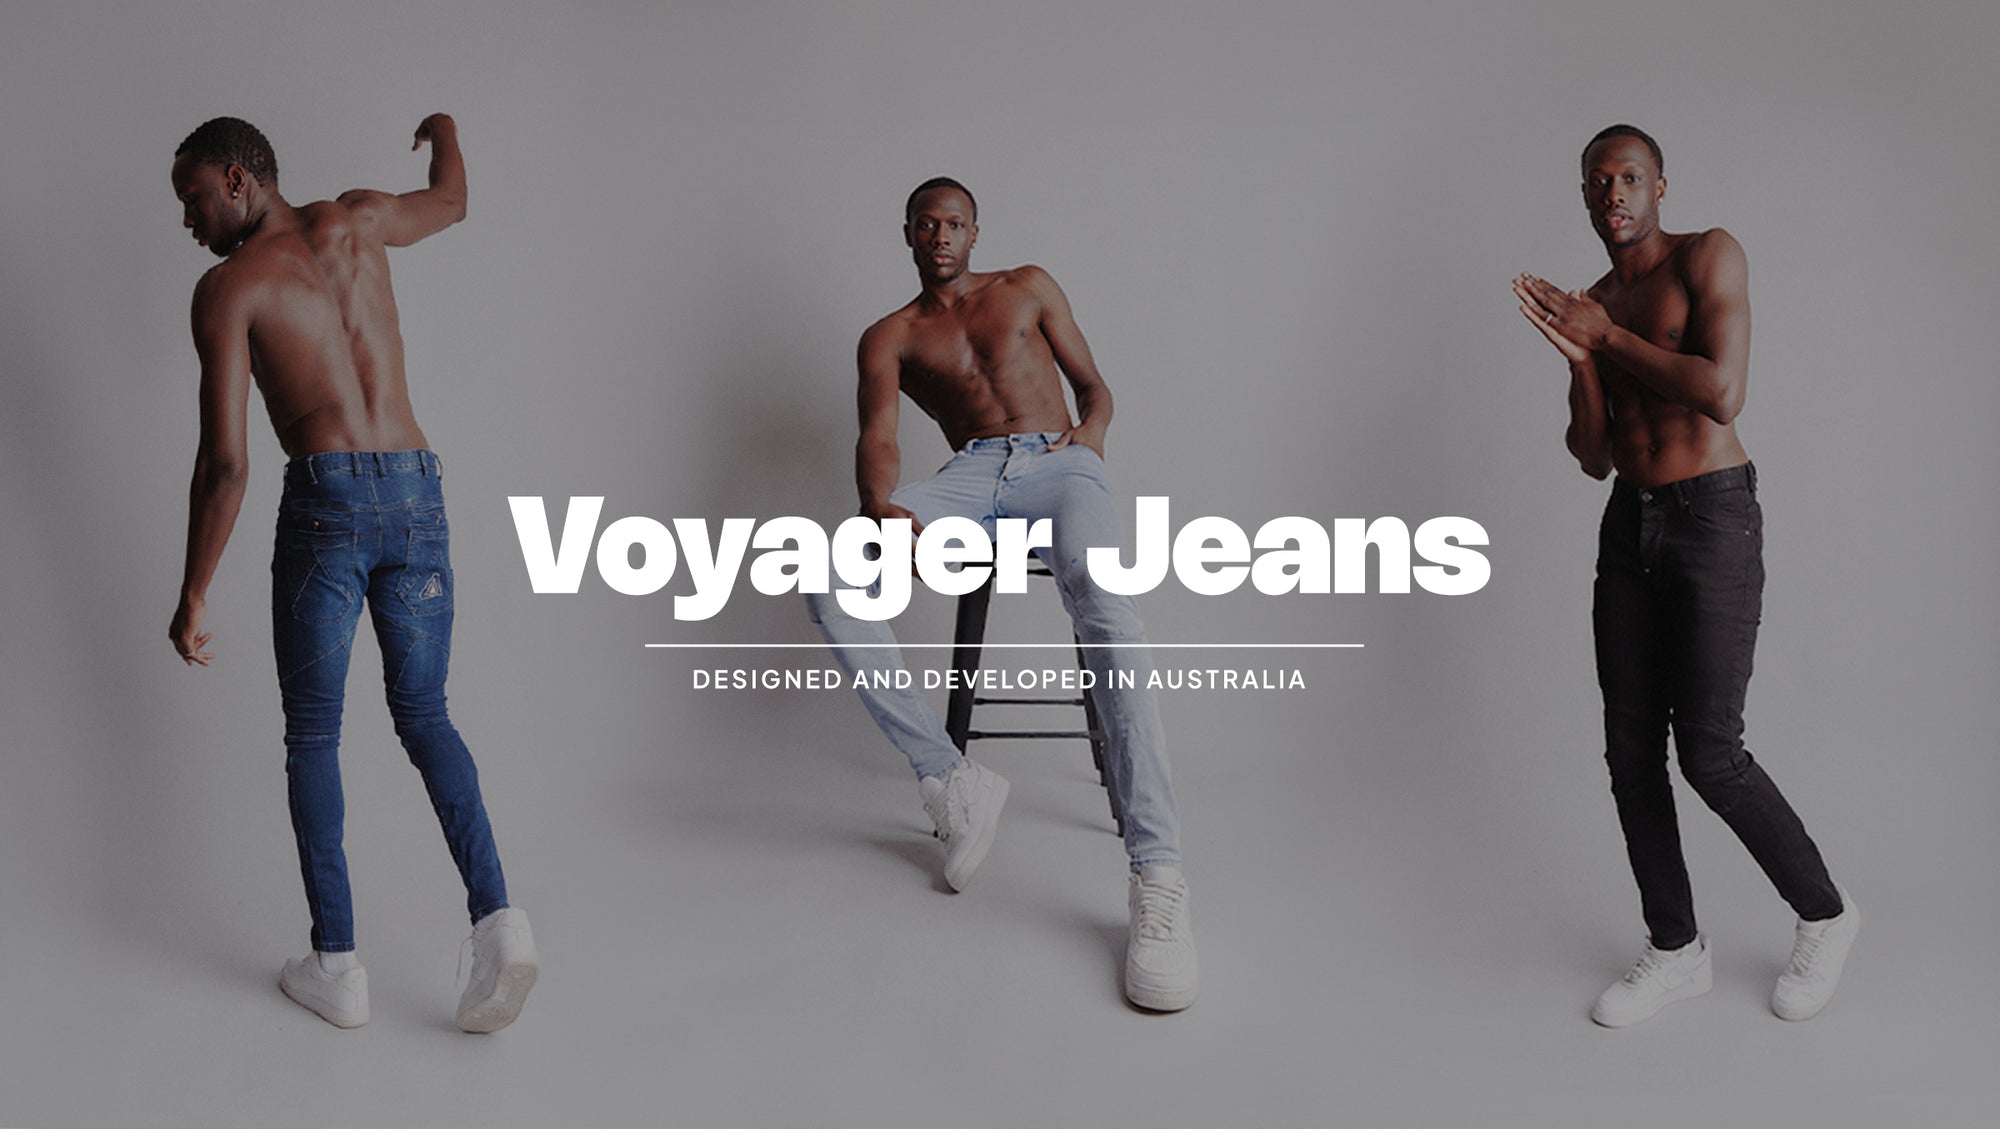 Voyager Jeans